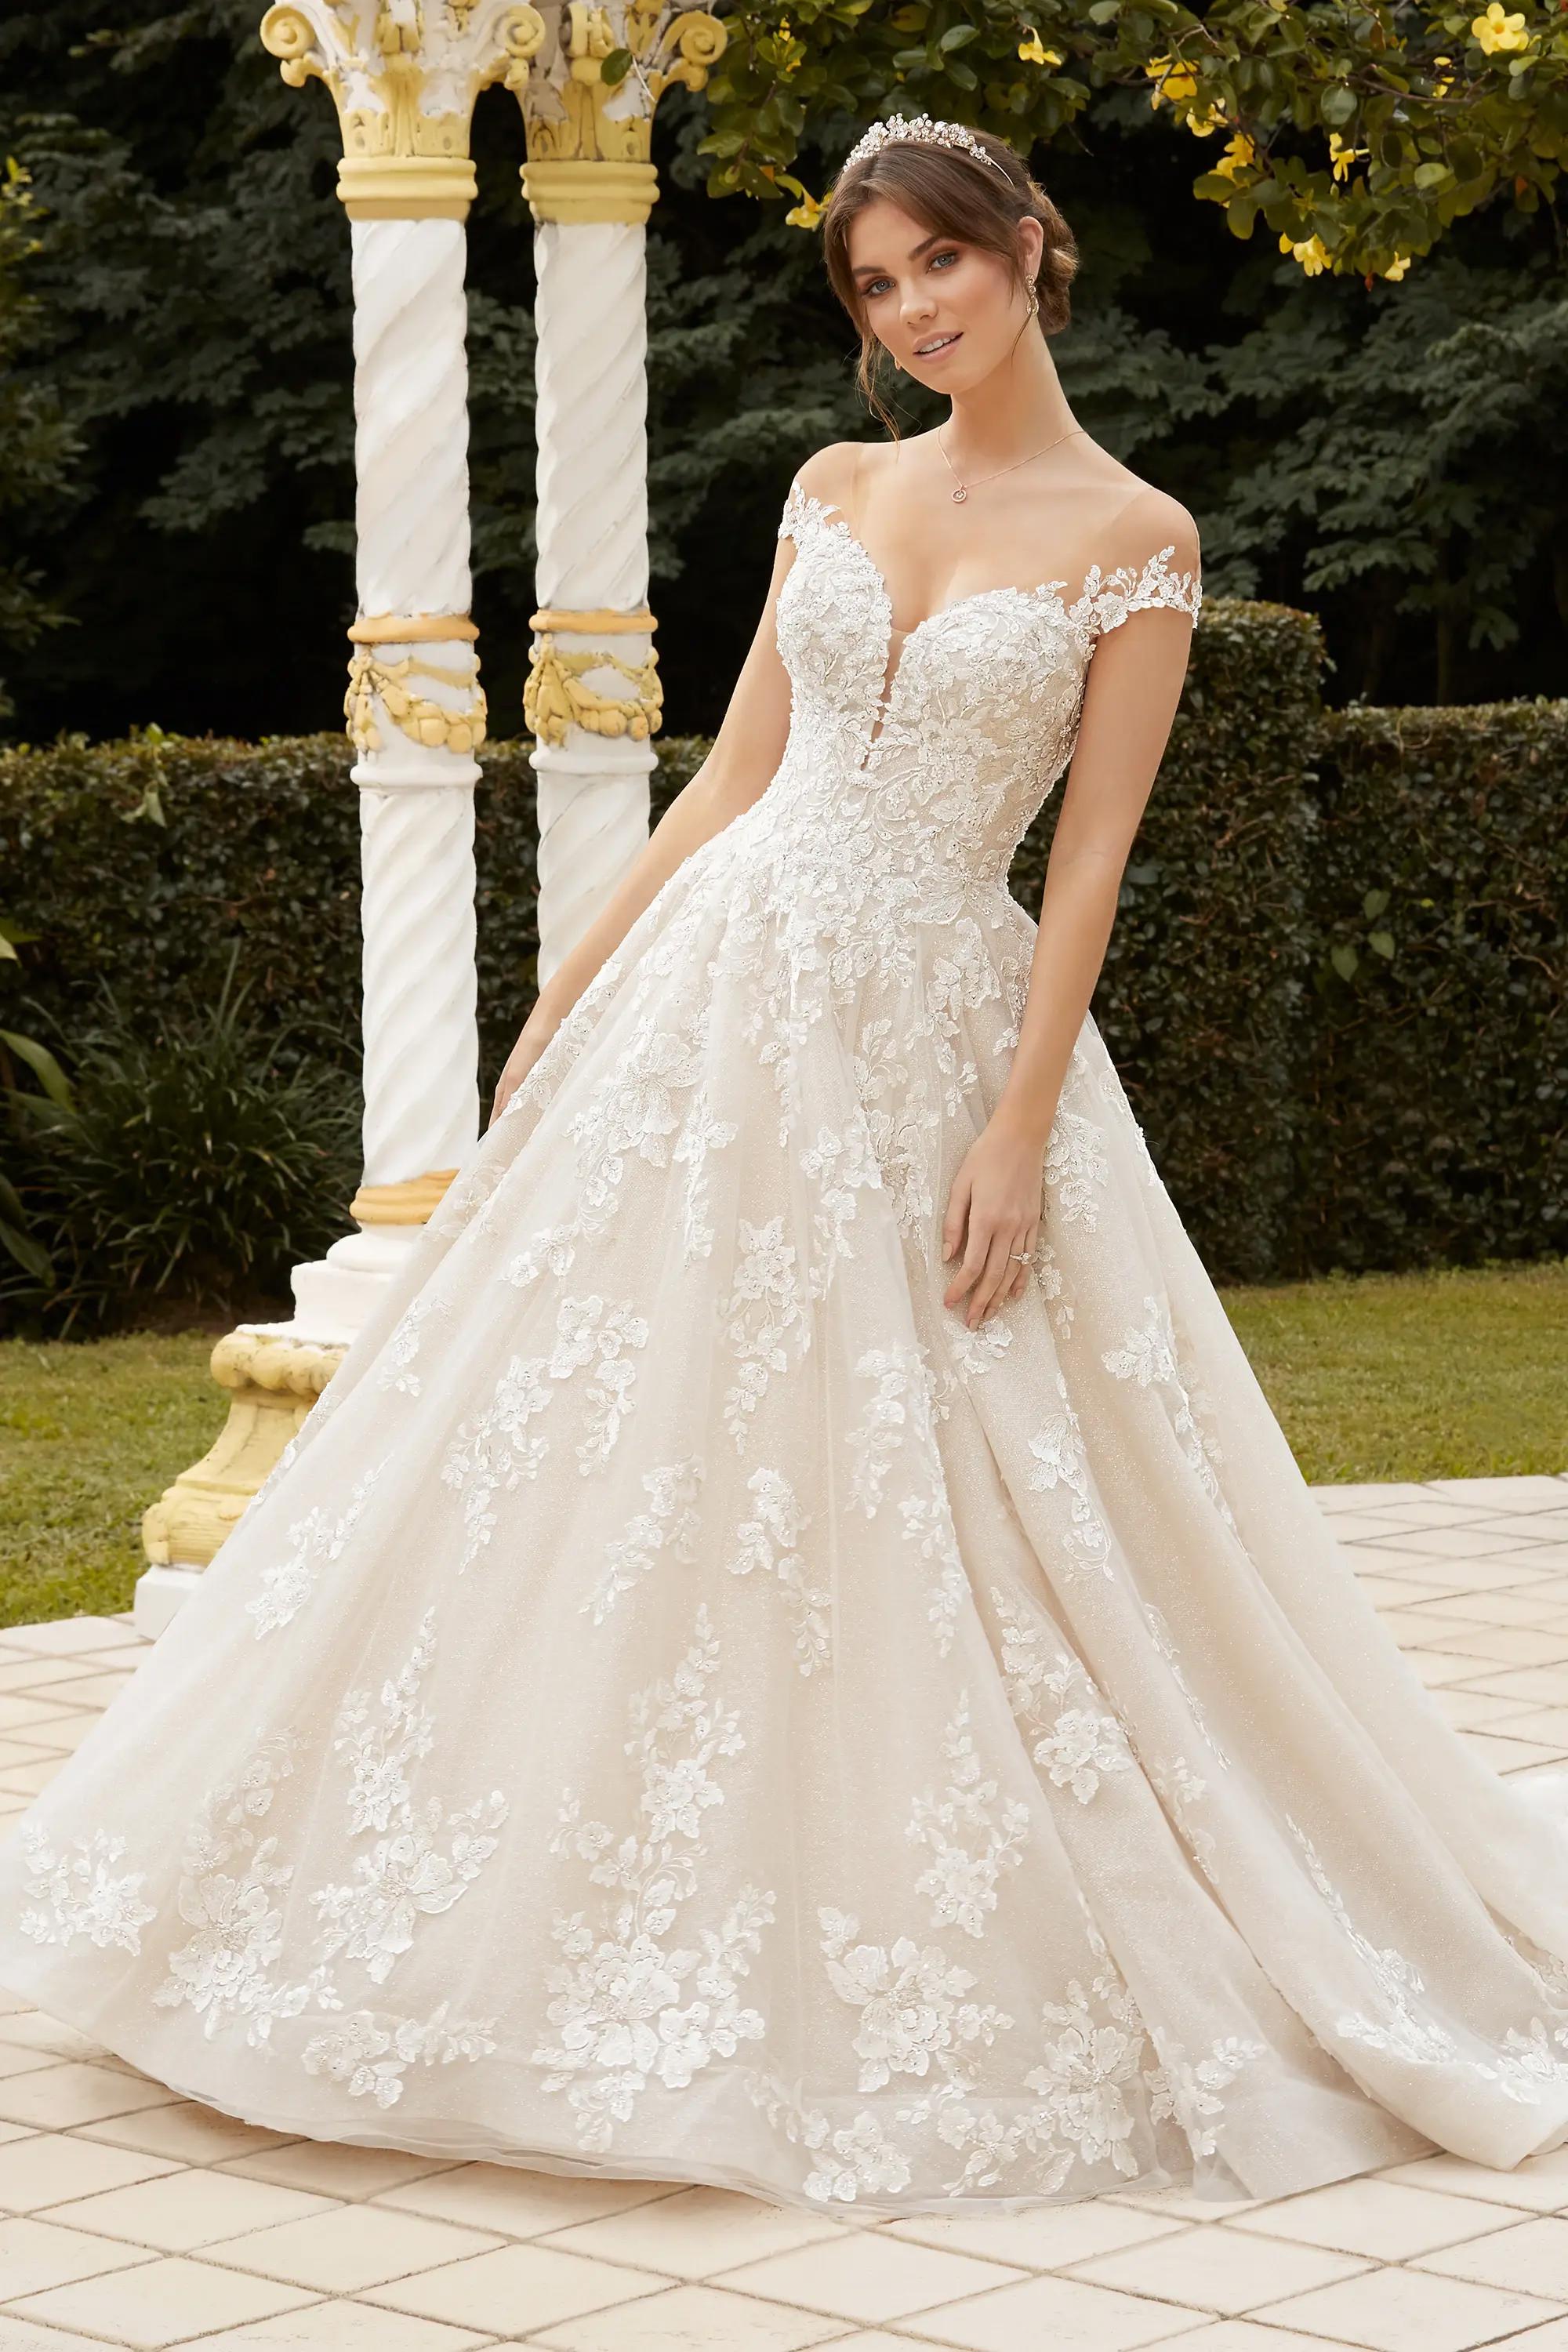 Royal Ballgown Wedding Dress with Beaded Lace Haven